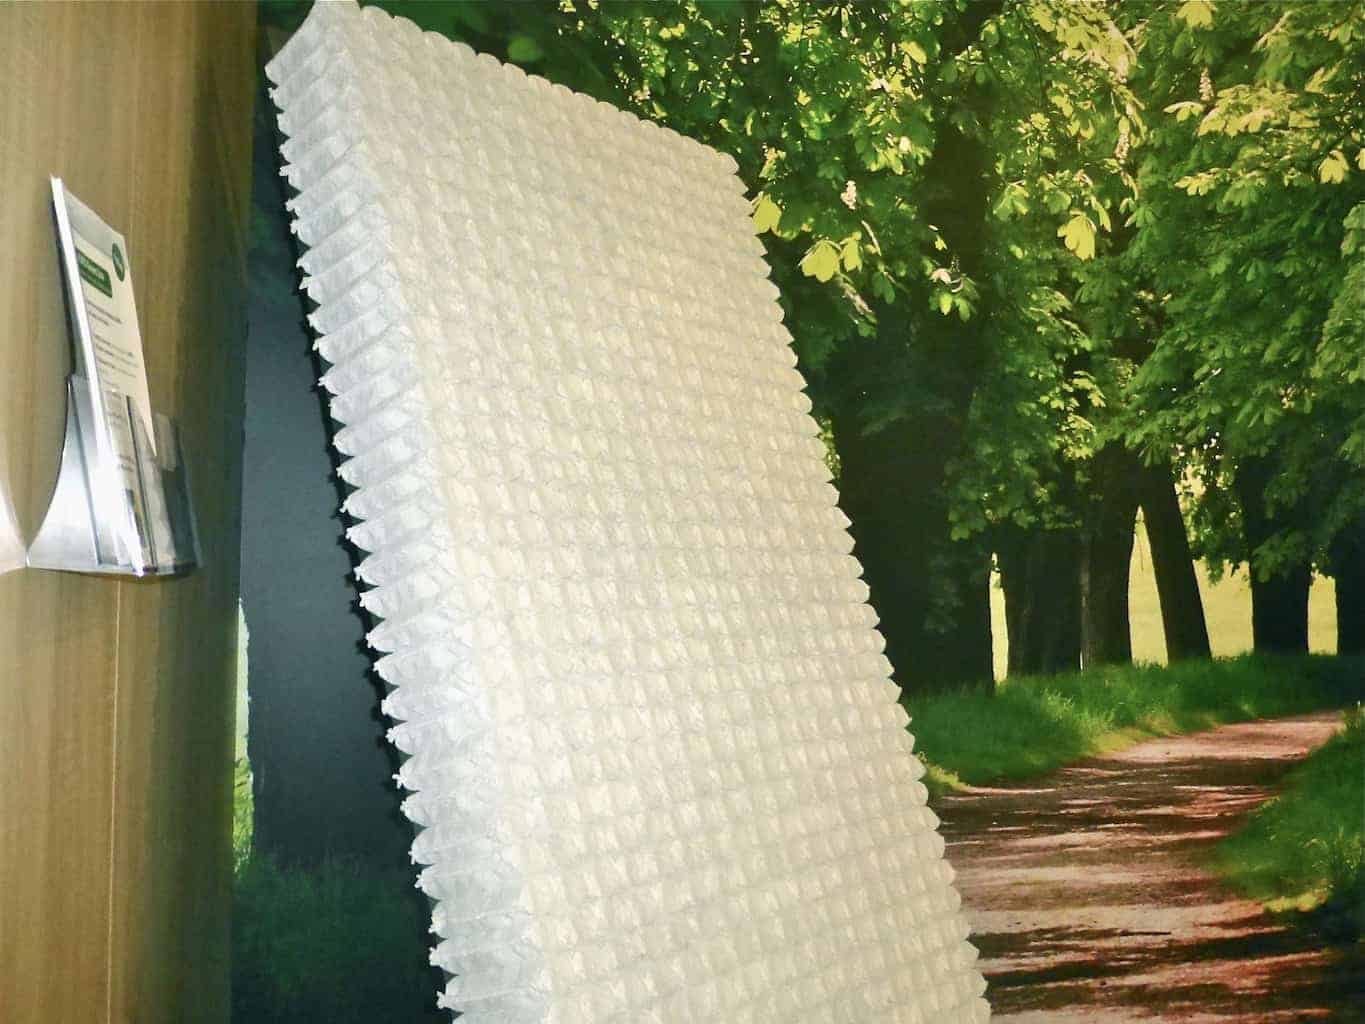 Agro recyclable Punktoflaex 1000s pocket springs